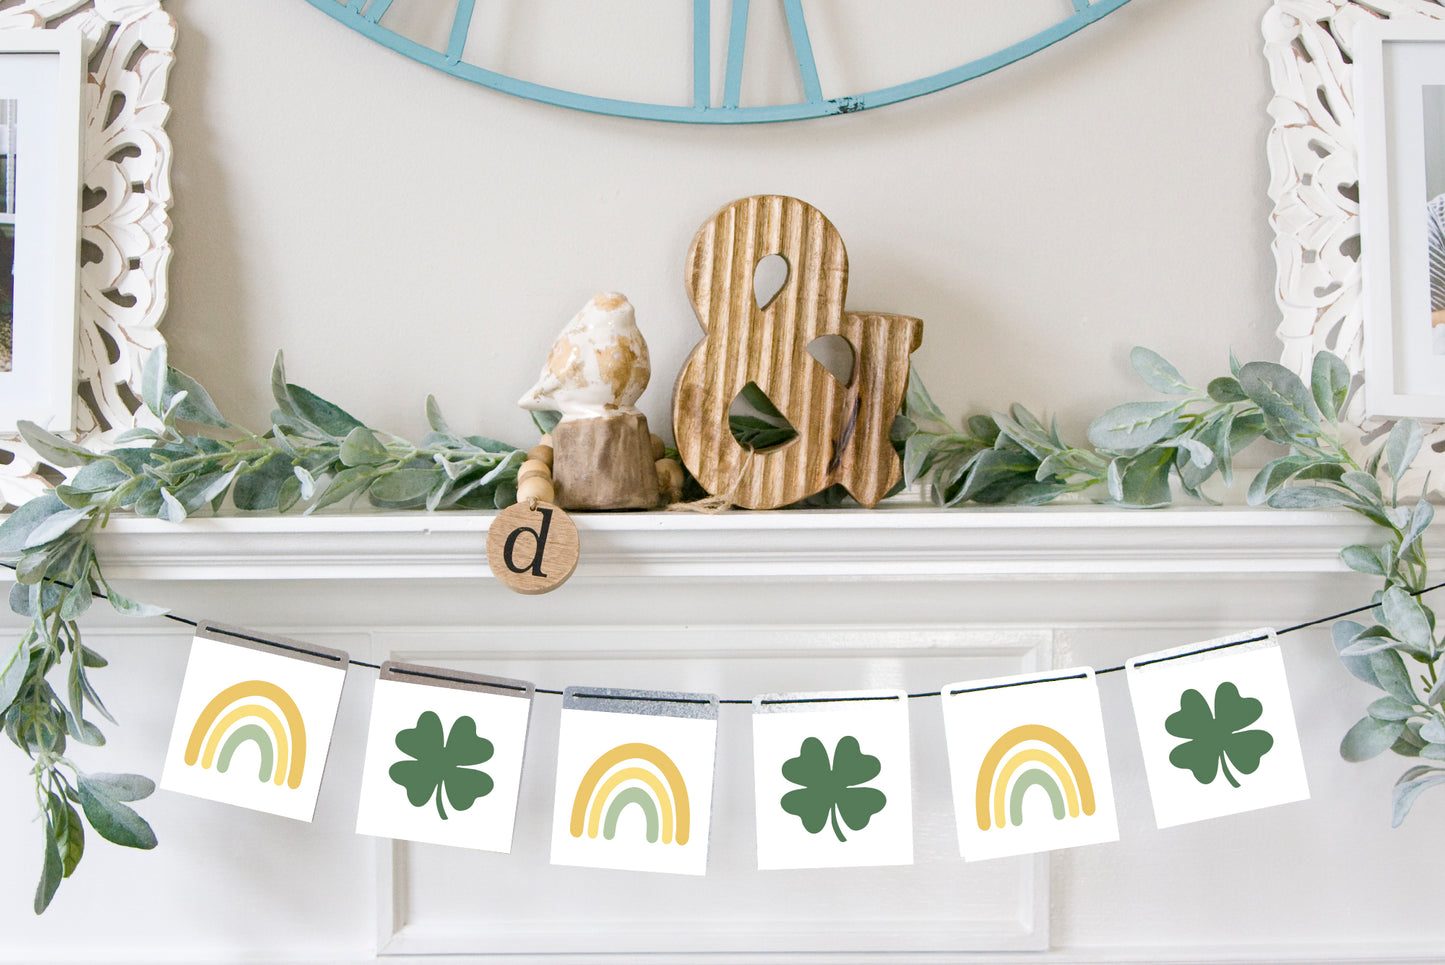 Magnetic Banner Insert: Rainbows and Clovers (St. Patrick/Spring) | Magnetic Banner INSERTS ONLY